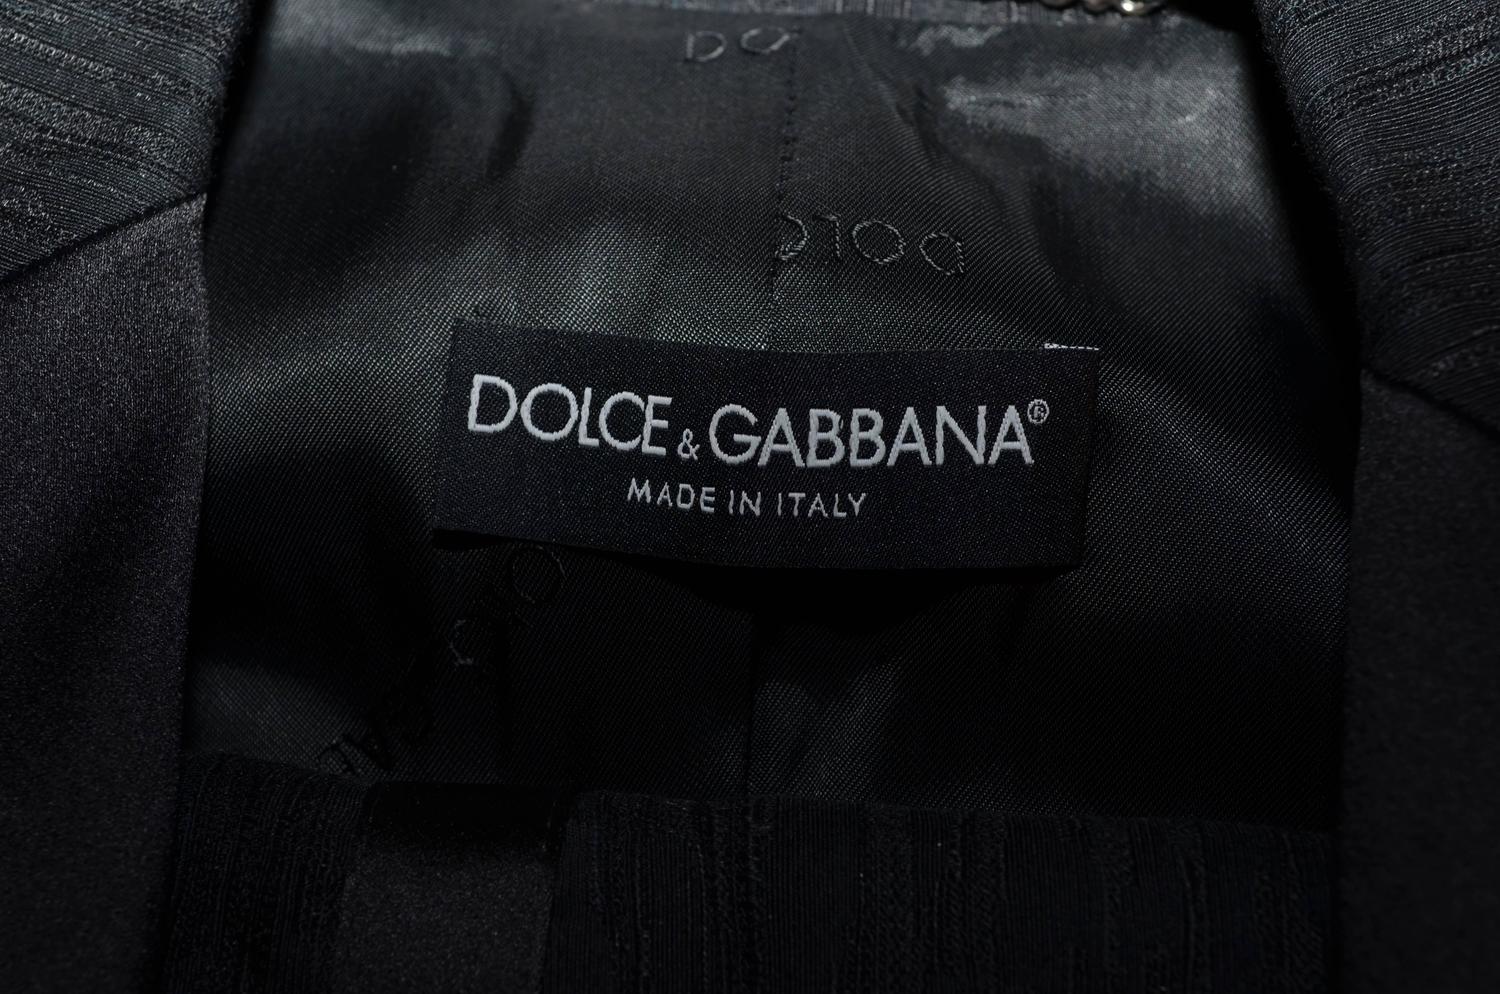 Dolce and Gabbana Women's Tuxedo Suit For Sale at 1stdibs